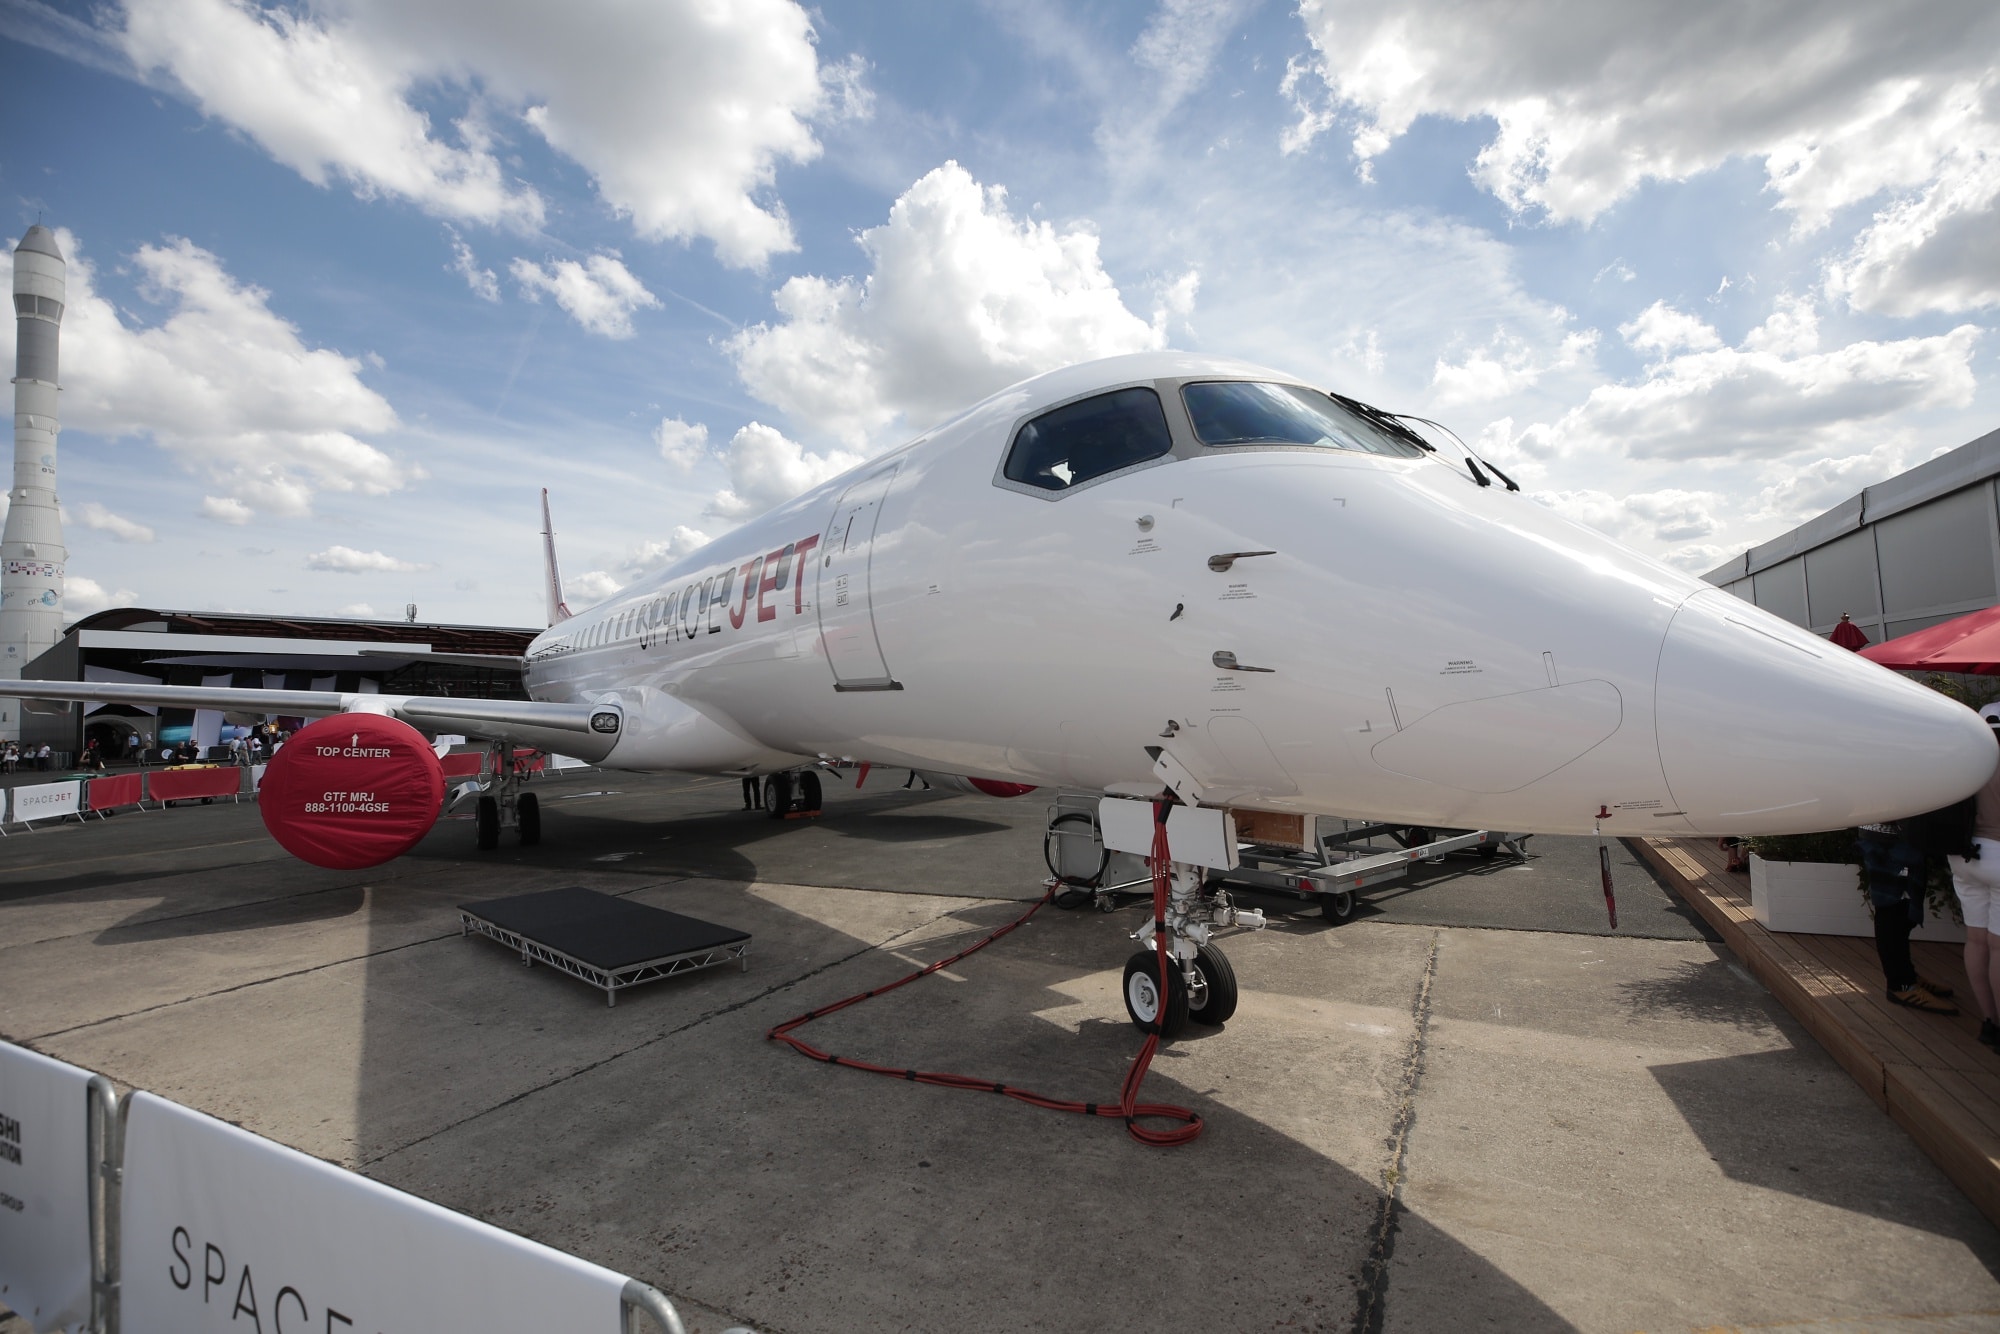 A SpaceJet regional jet at the 53rd International Paris Air Show at Le Bourget on June 17, 2019. Photographer: Jason Alden/Bloomberg